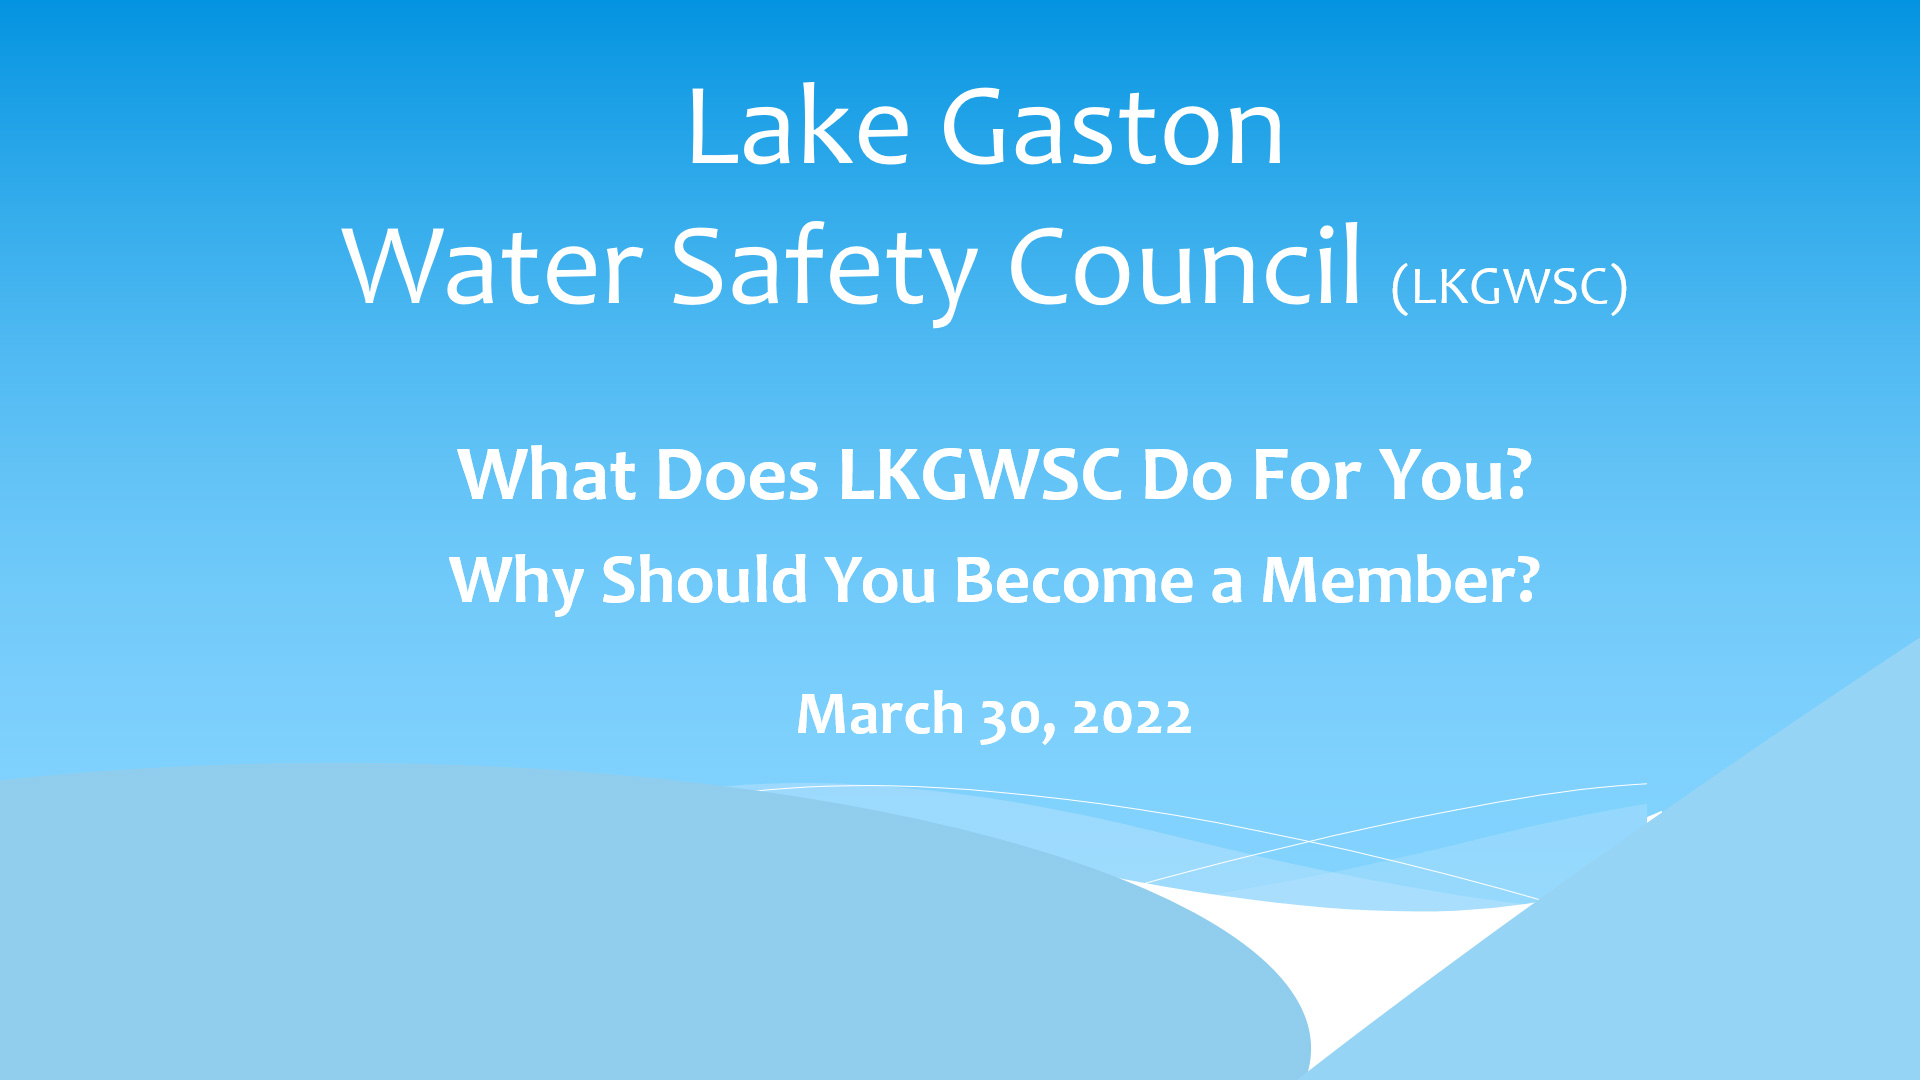 What Does LKGWSC Do For You? Why Should You Become a Member?